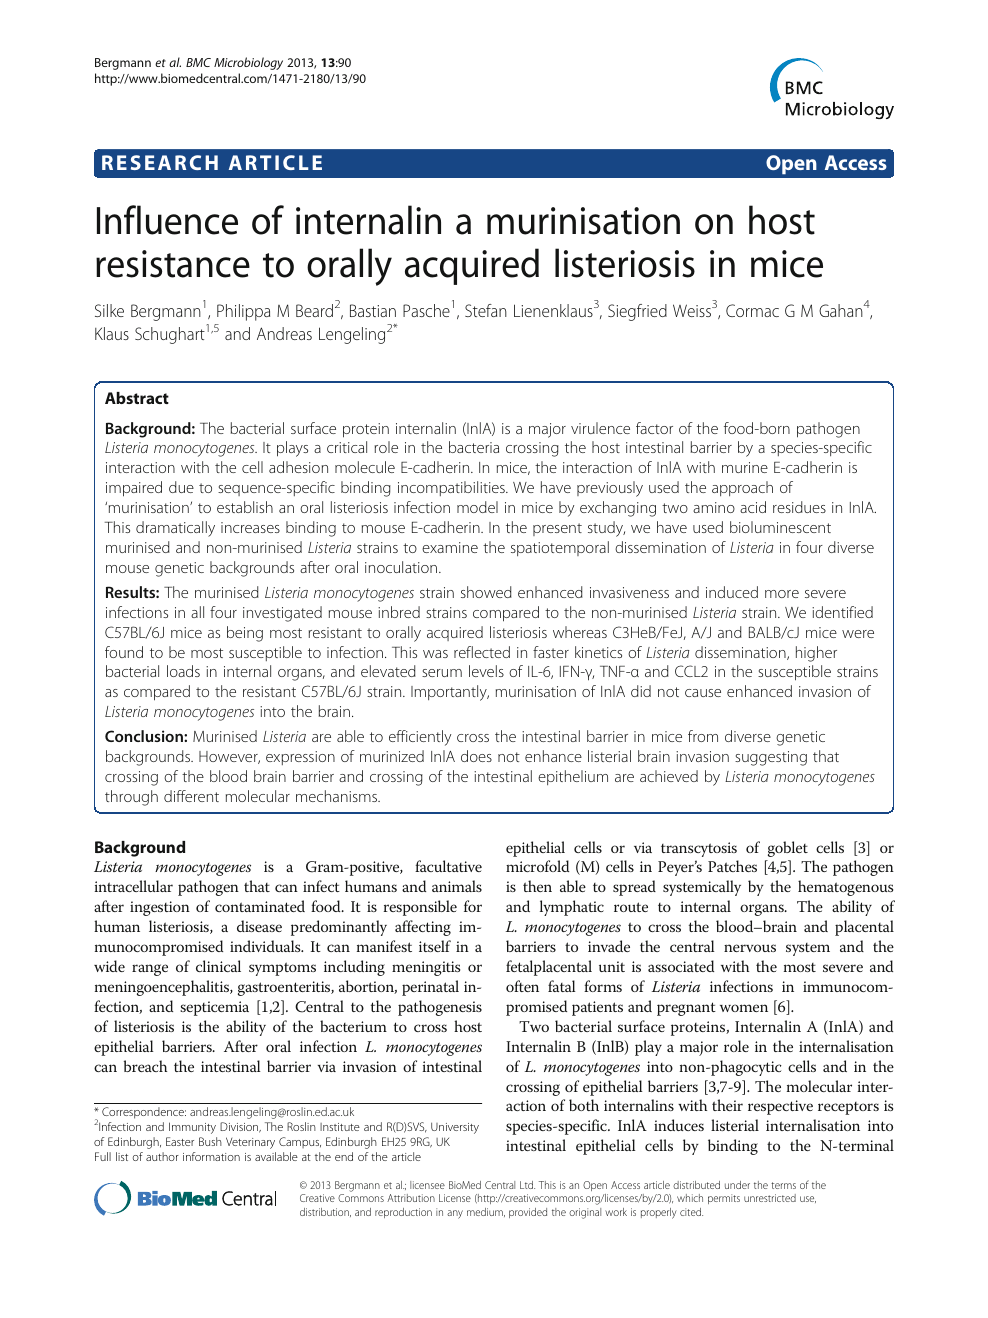 Wonderful internalin Influence Of Internalin A Murinisation On Host Resistance To Orally Acquired Listeriosis In Mice Topic Research Paper Biological Sciences Download Scholarly Article Pdf And Read For Free Cyberleninka